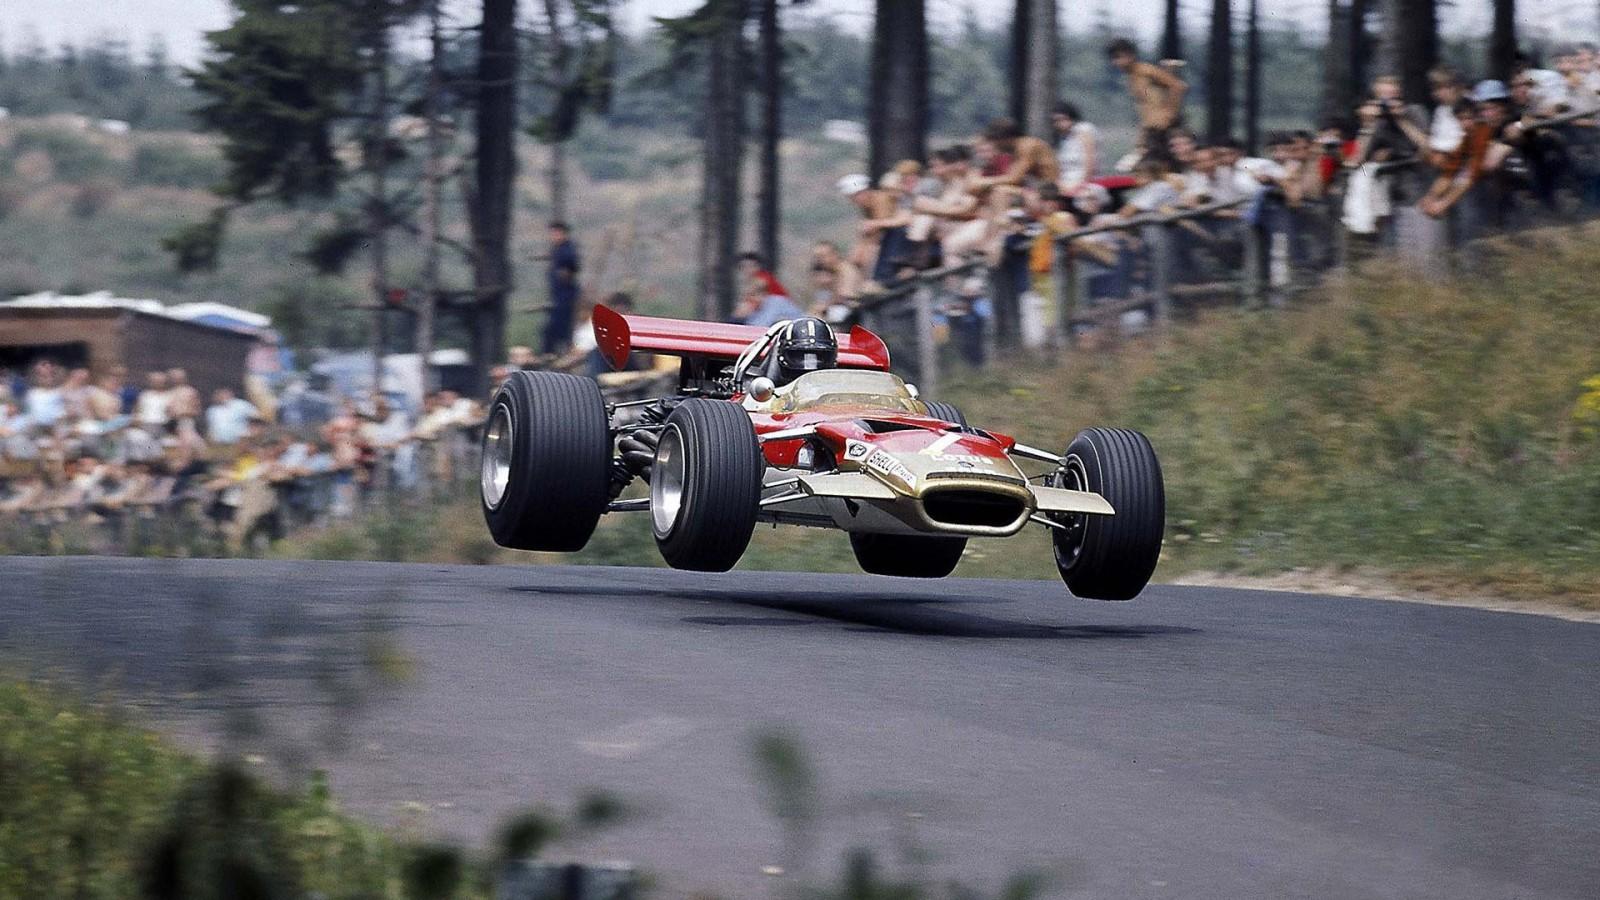 Graham Hill driving the Lotus 49 in 1969.